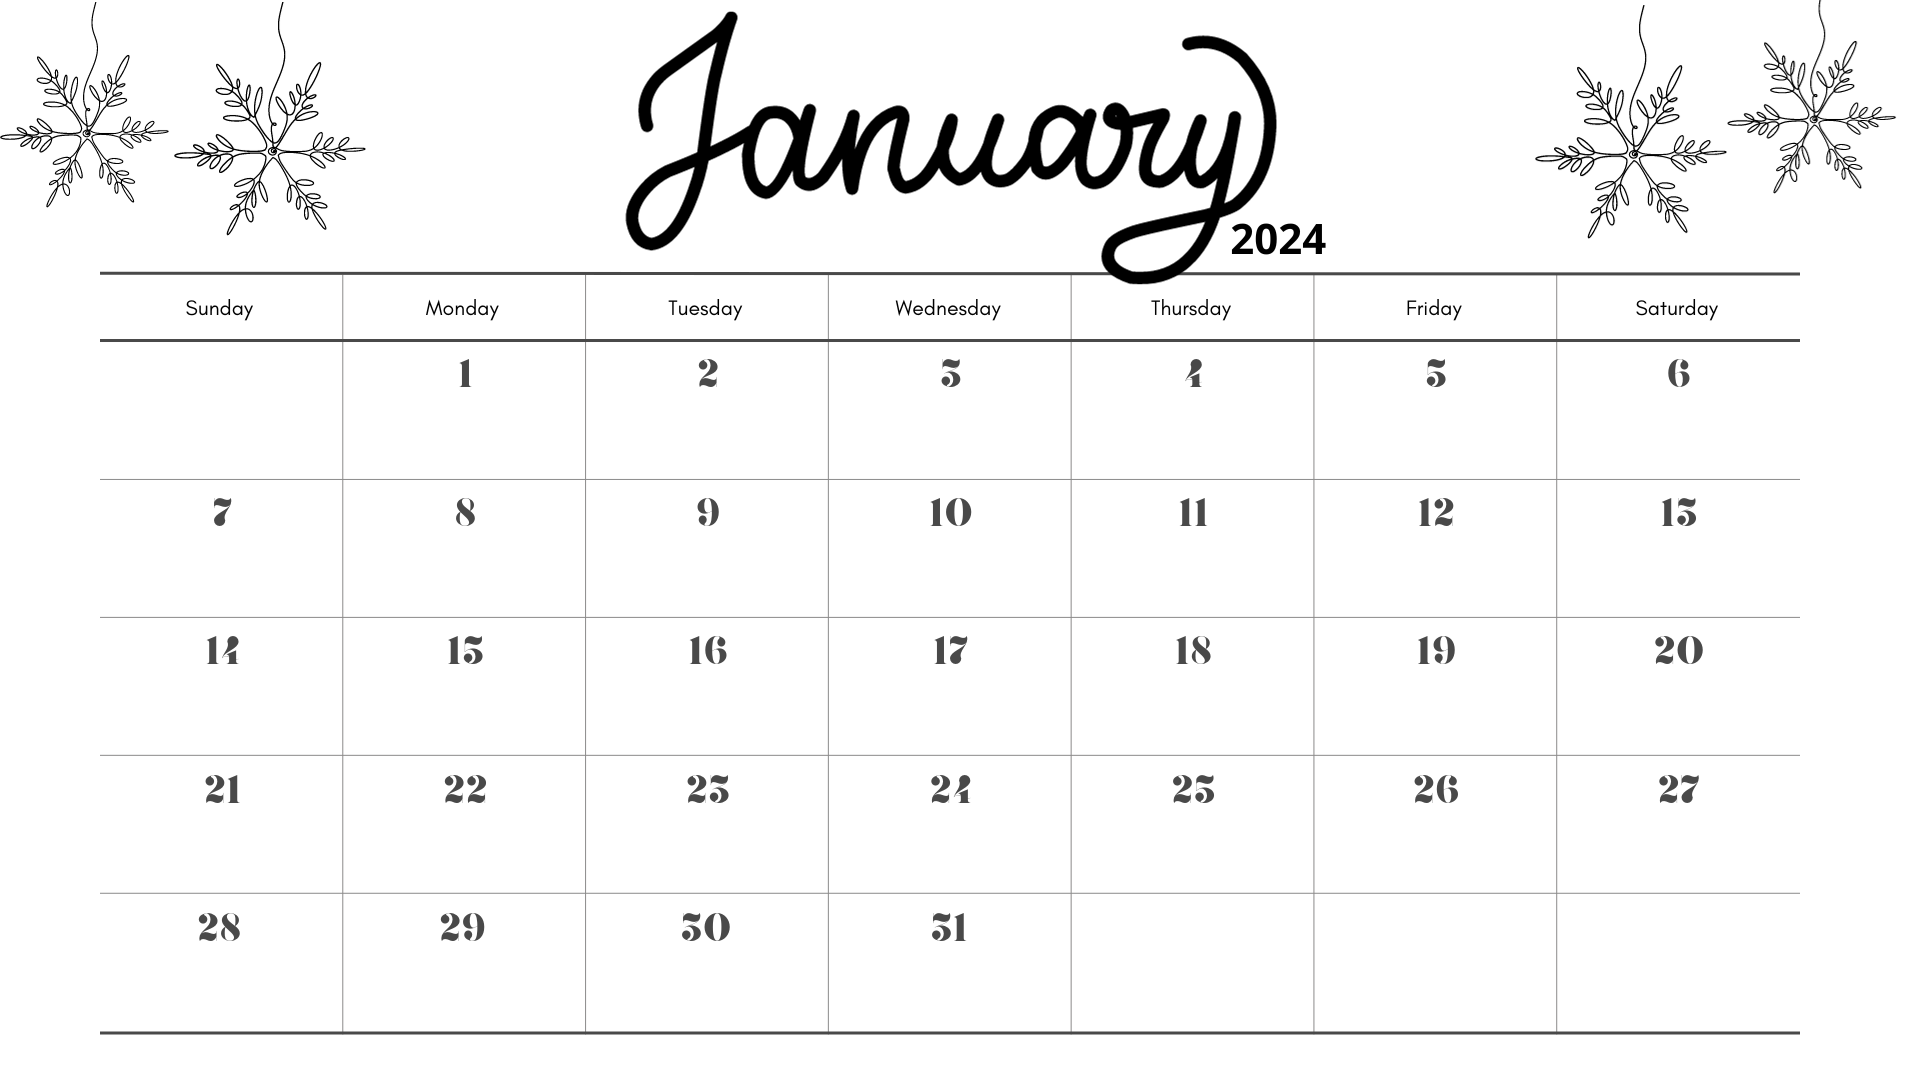 Looking for a free printable January 2024 calendar? Stay organized and plan your month with ease using my downloadable month January cute calendars. Sunday start blank January calendars! Use as work or school calendars.